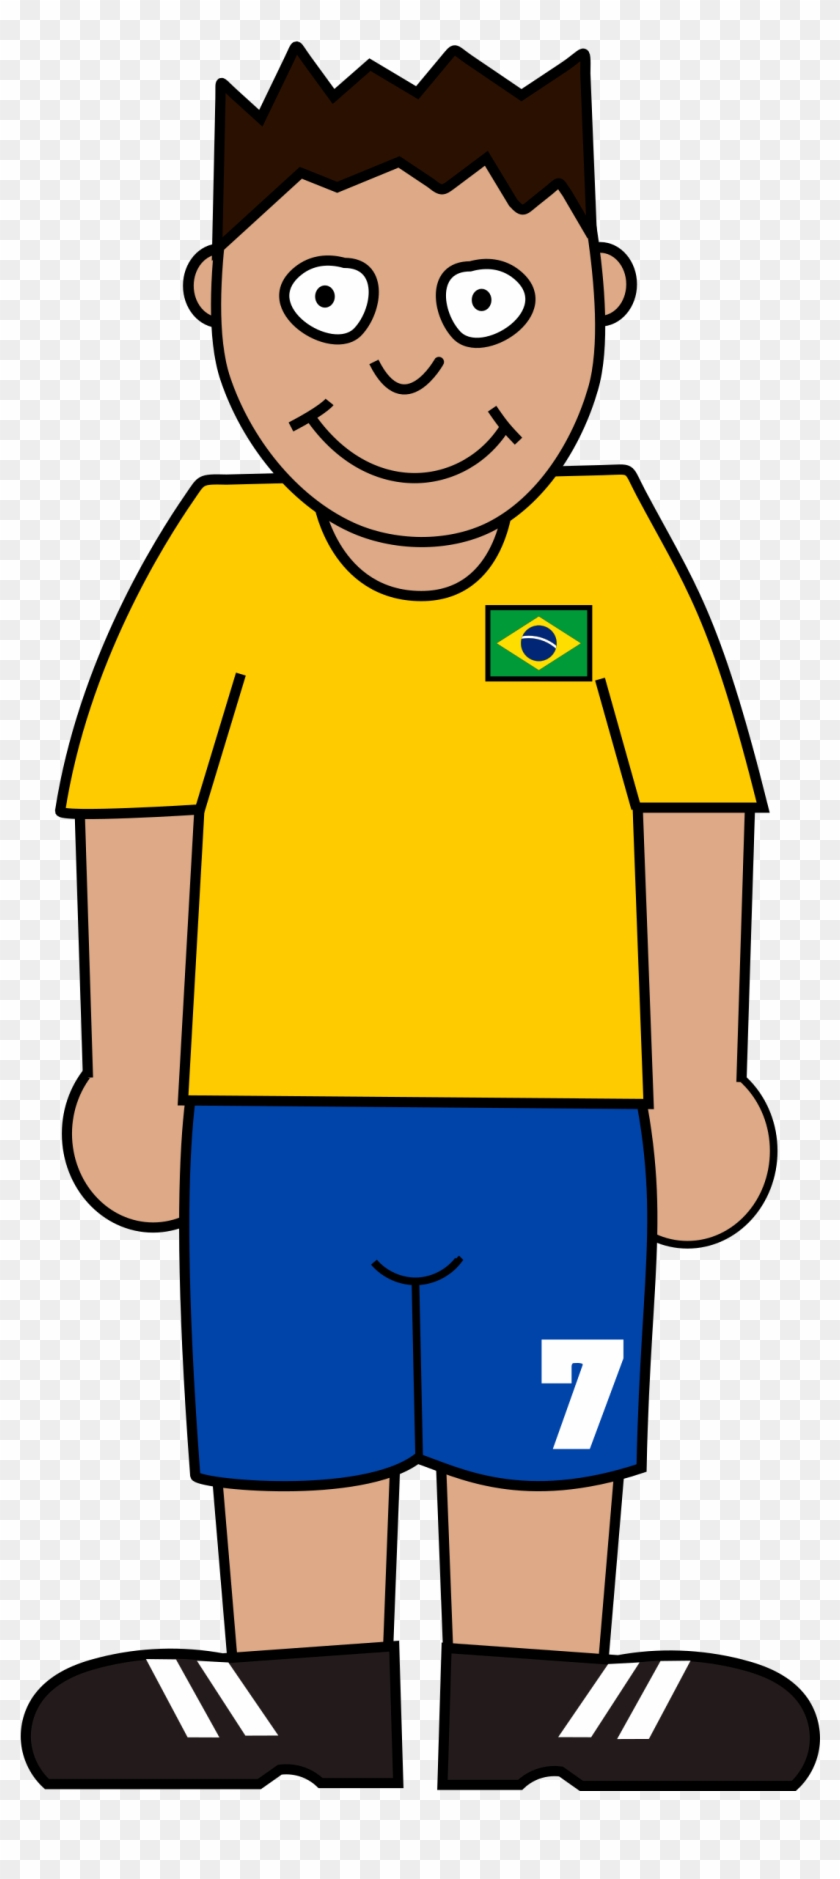 Big Image - World Cup Soccer Player Clipart Png #1163704